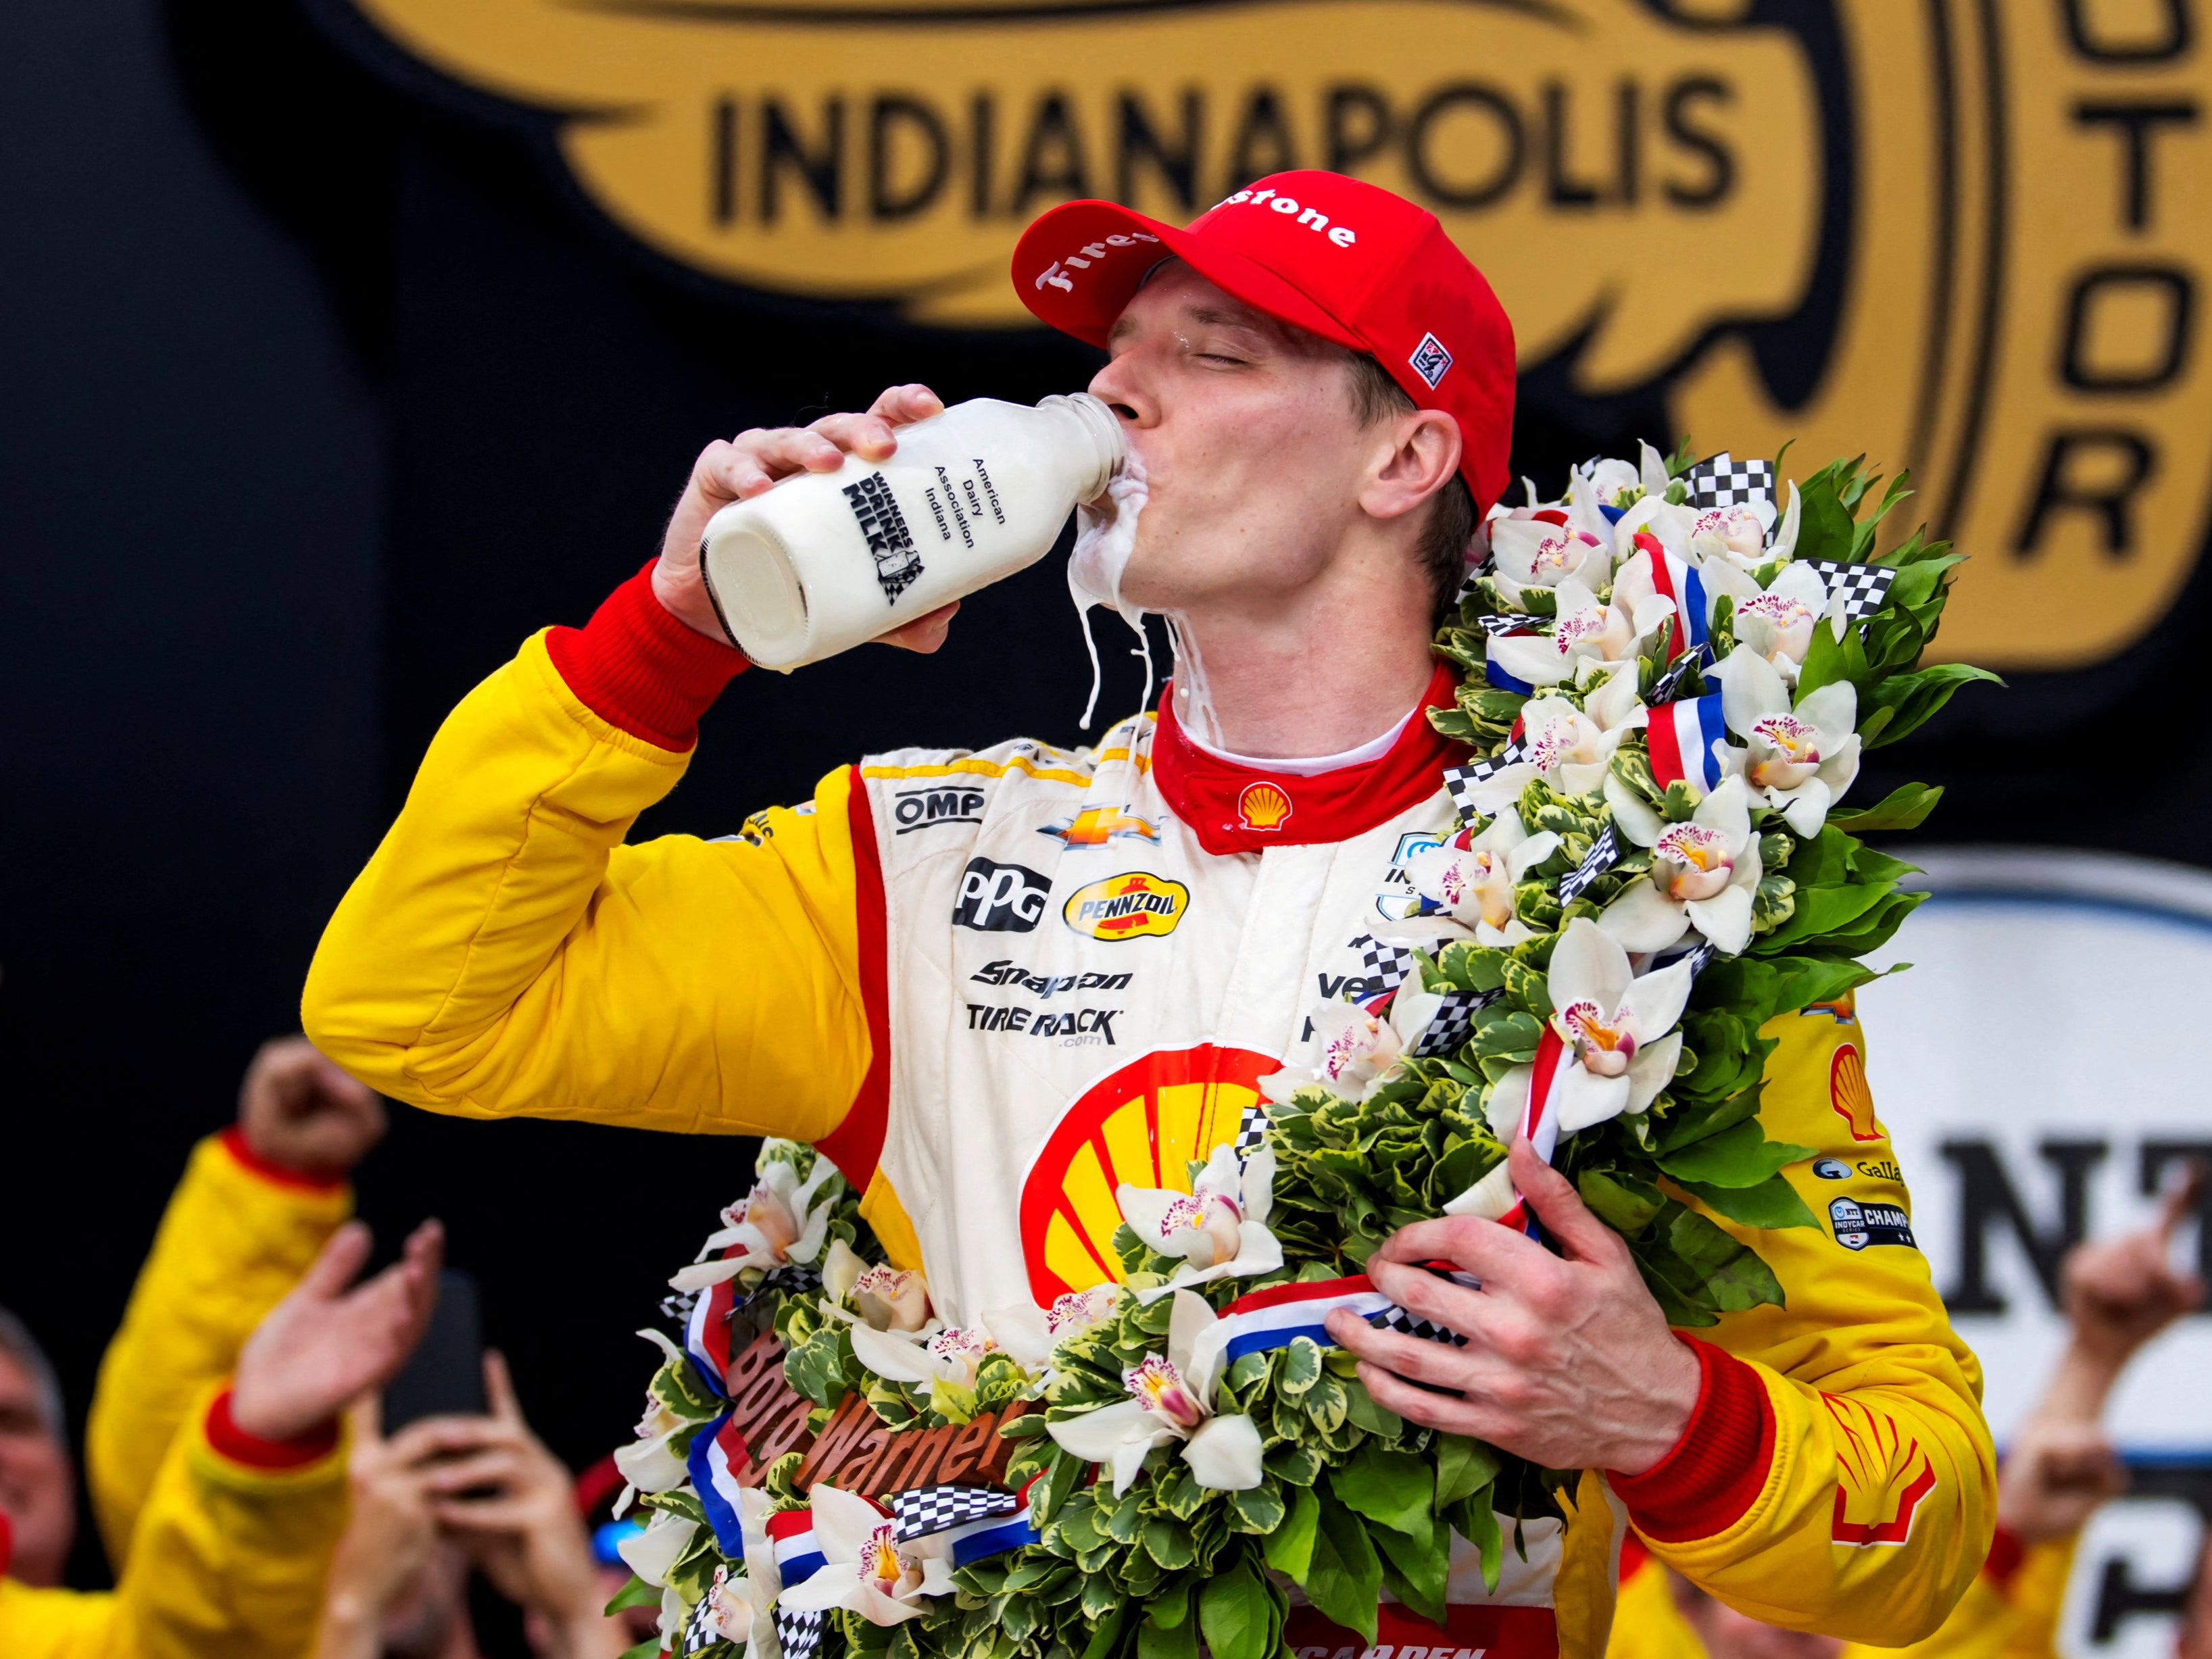 Indycar Series driver Josef Newgarden celebrates after winning the 108th running of the Indianapolis 500 at Indianapolis Motor Speedway on Sunday 26 May 2024